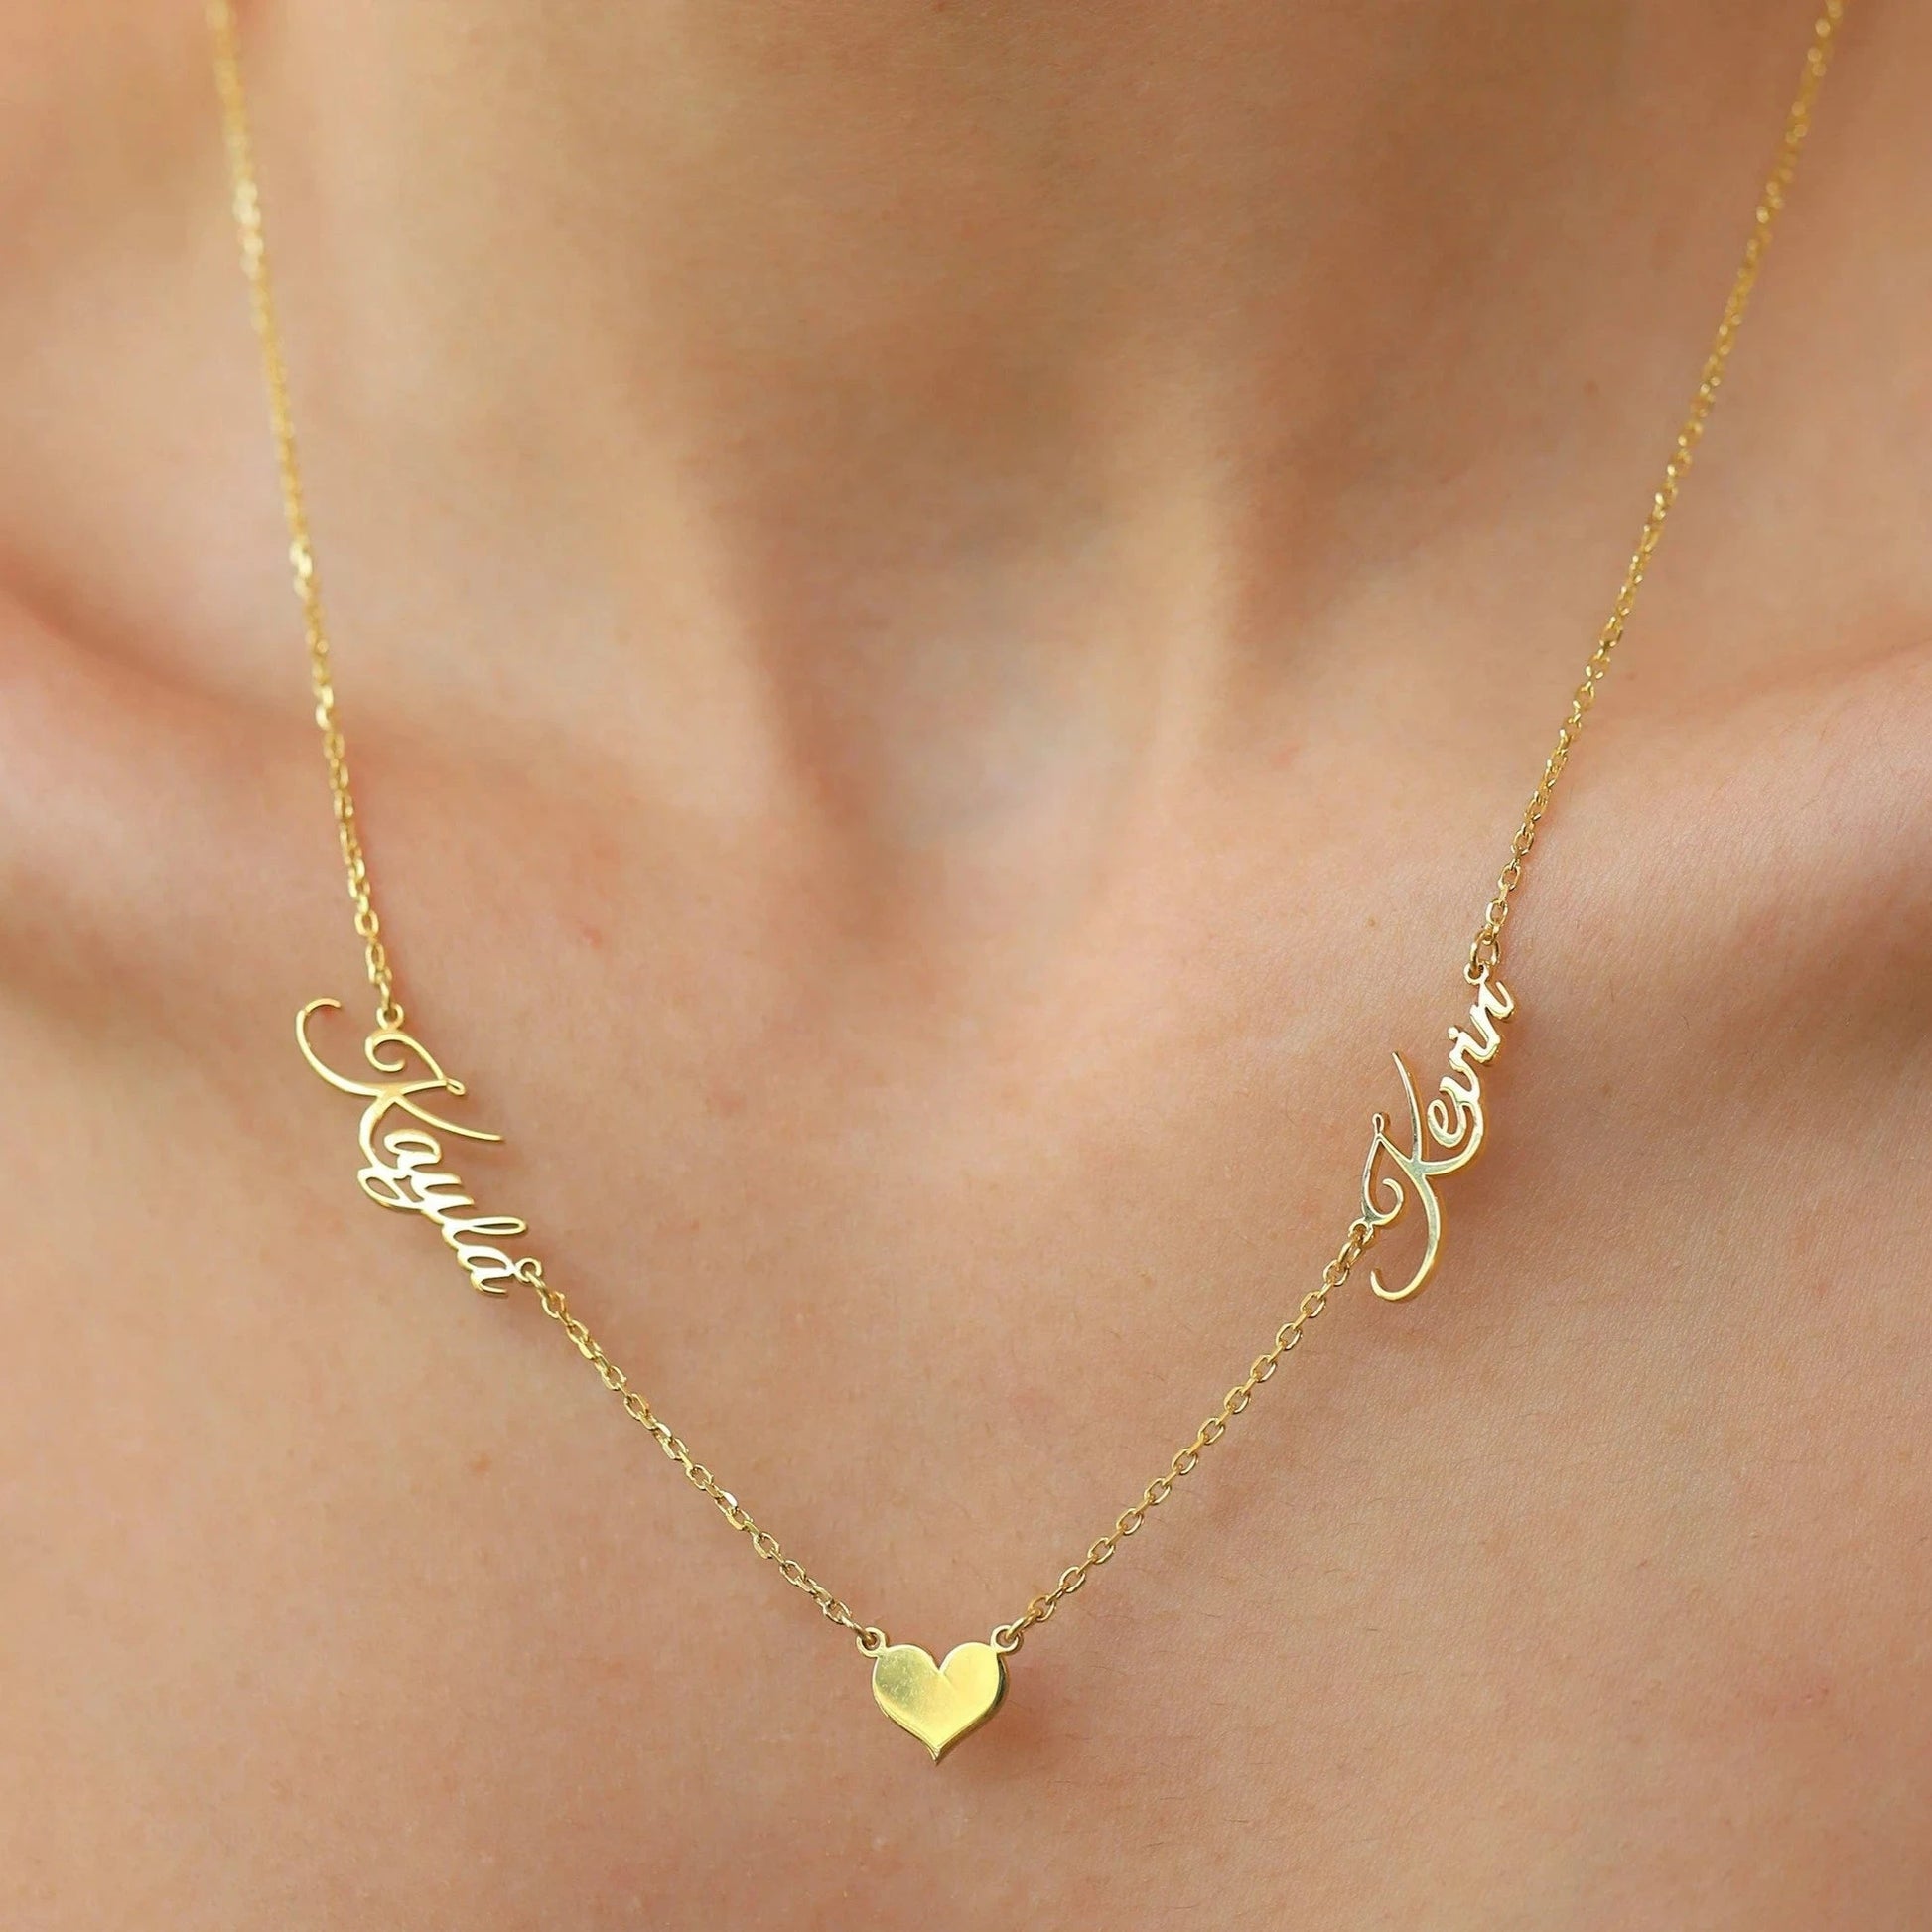 Gold Two Names Heart Couple Necklace - Personalized Jewelry